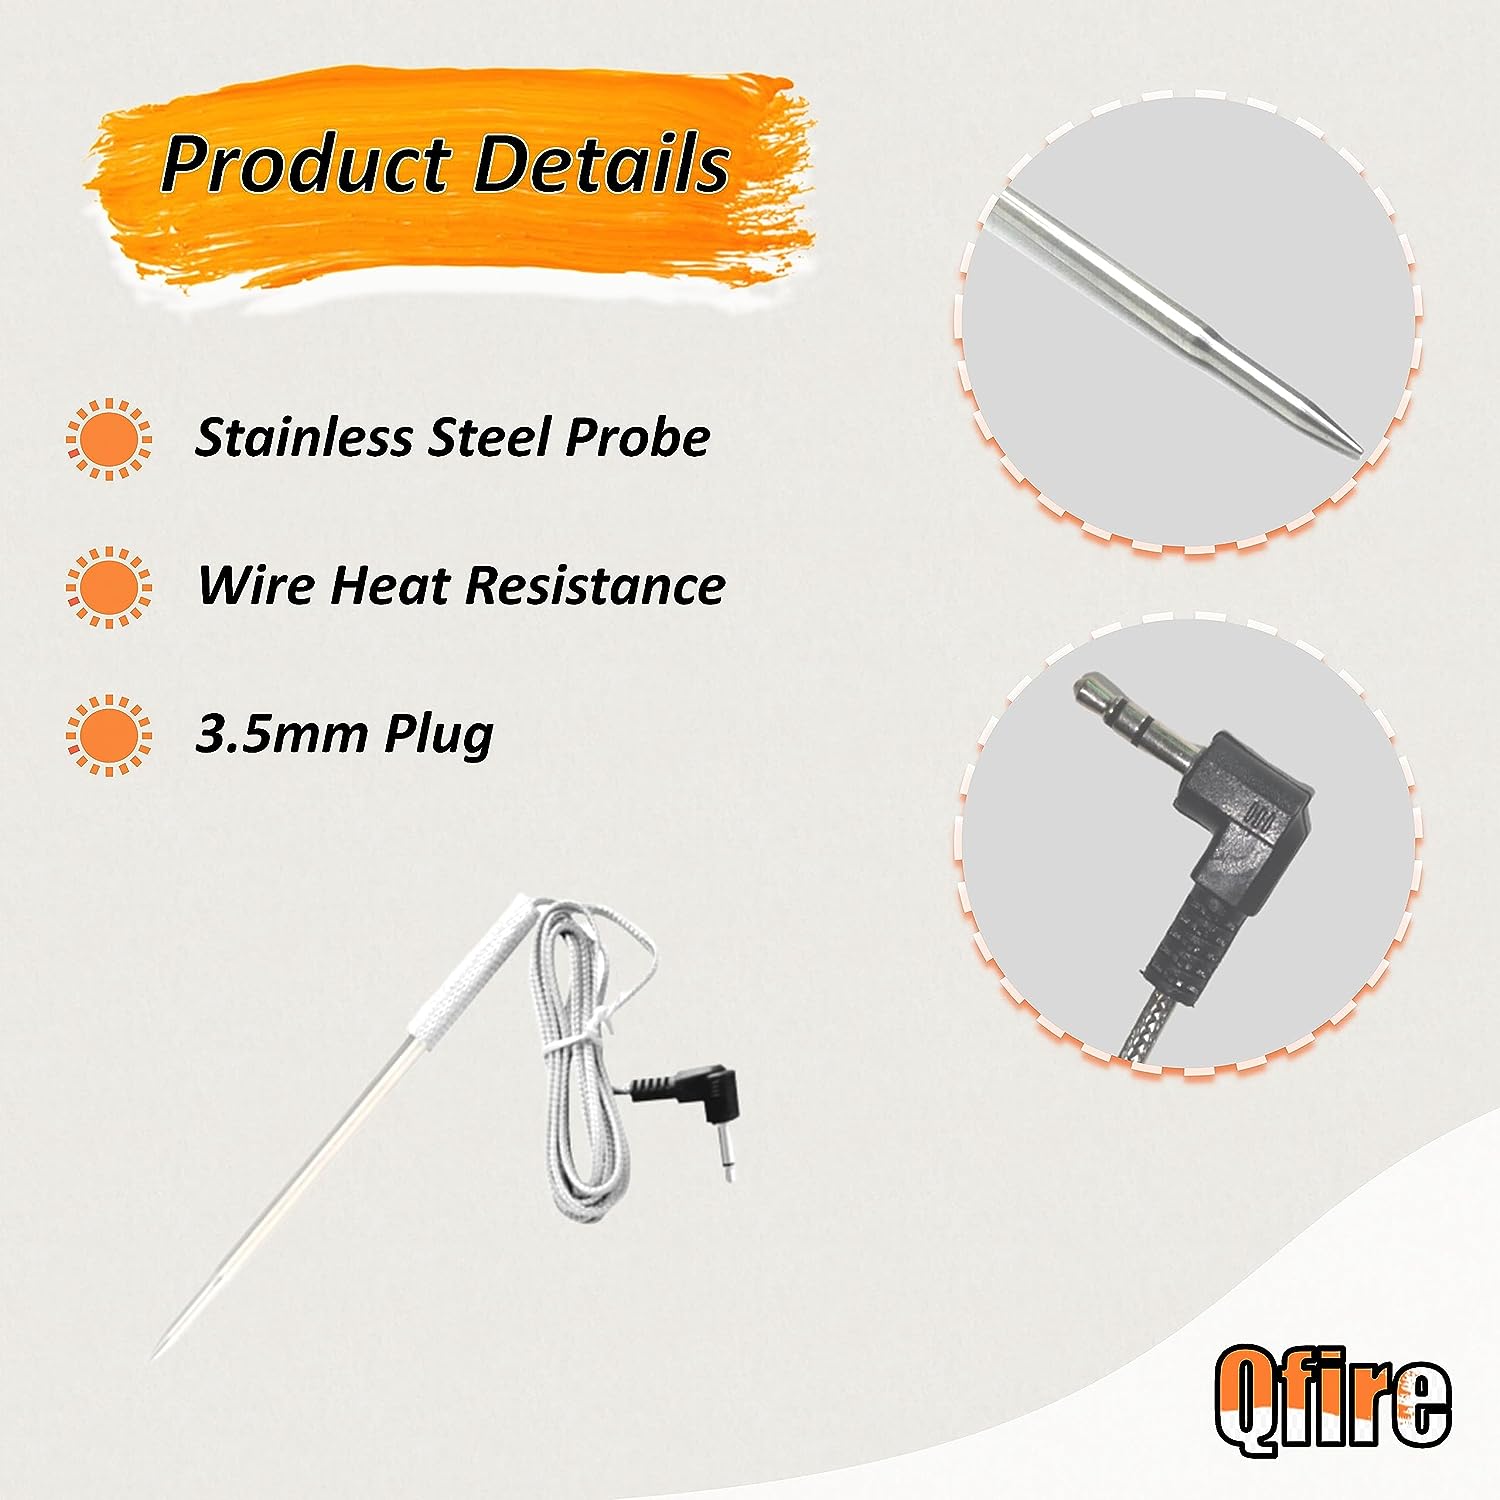 5 Benefits of Smart Thermometers with Wired Probes